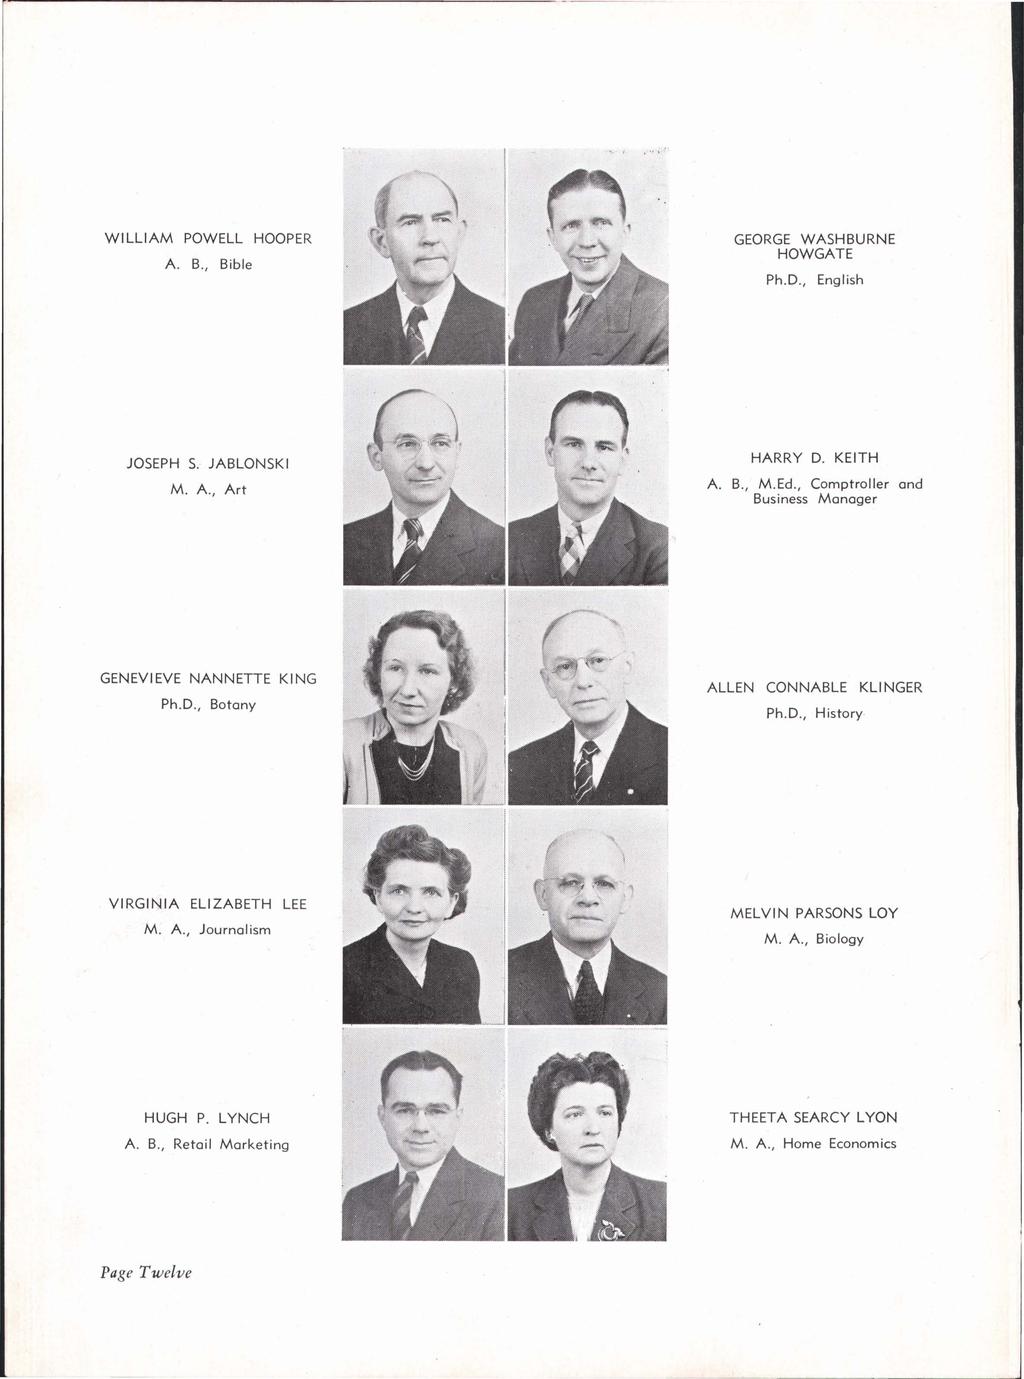 WILLIAM POWELL HOOPER A. B., Bible GEORGE WASHBURNE HOWGATE Ph.D., English JOSEPH S. JABLONSKI M. A., Art HARRY D. KEITH A. B., M.Ed., Comptroller and Business Manager GENEVIEVE NANNETTE KING Ph.D., Botany ALLEN CONNABLE KLINGER Ph.